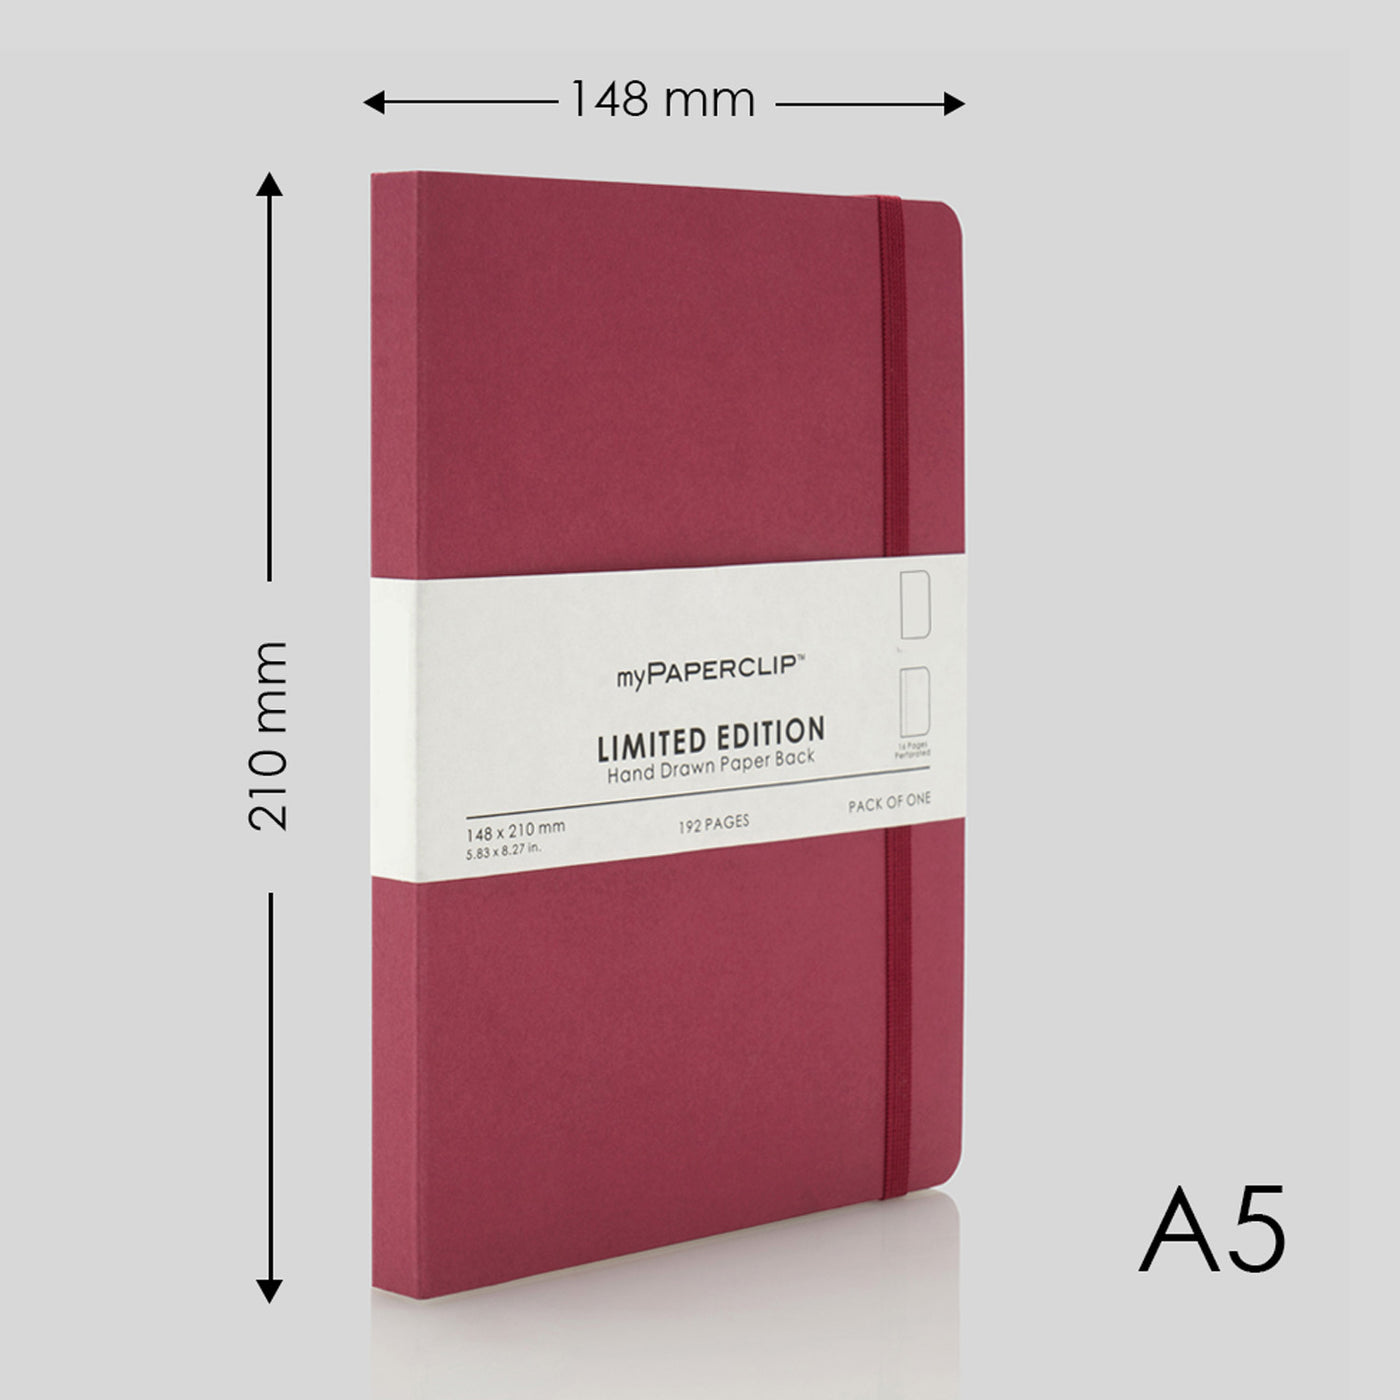 myPAPERCLIP Limited Edition Soft Cover Notebook - Raspberry - A5 - Plain 2